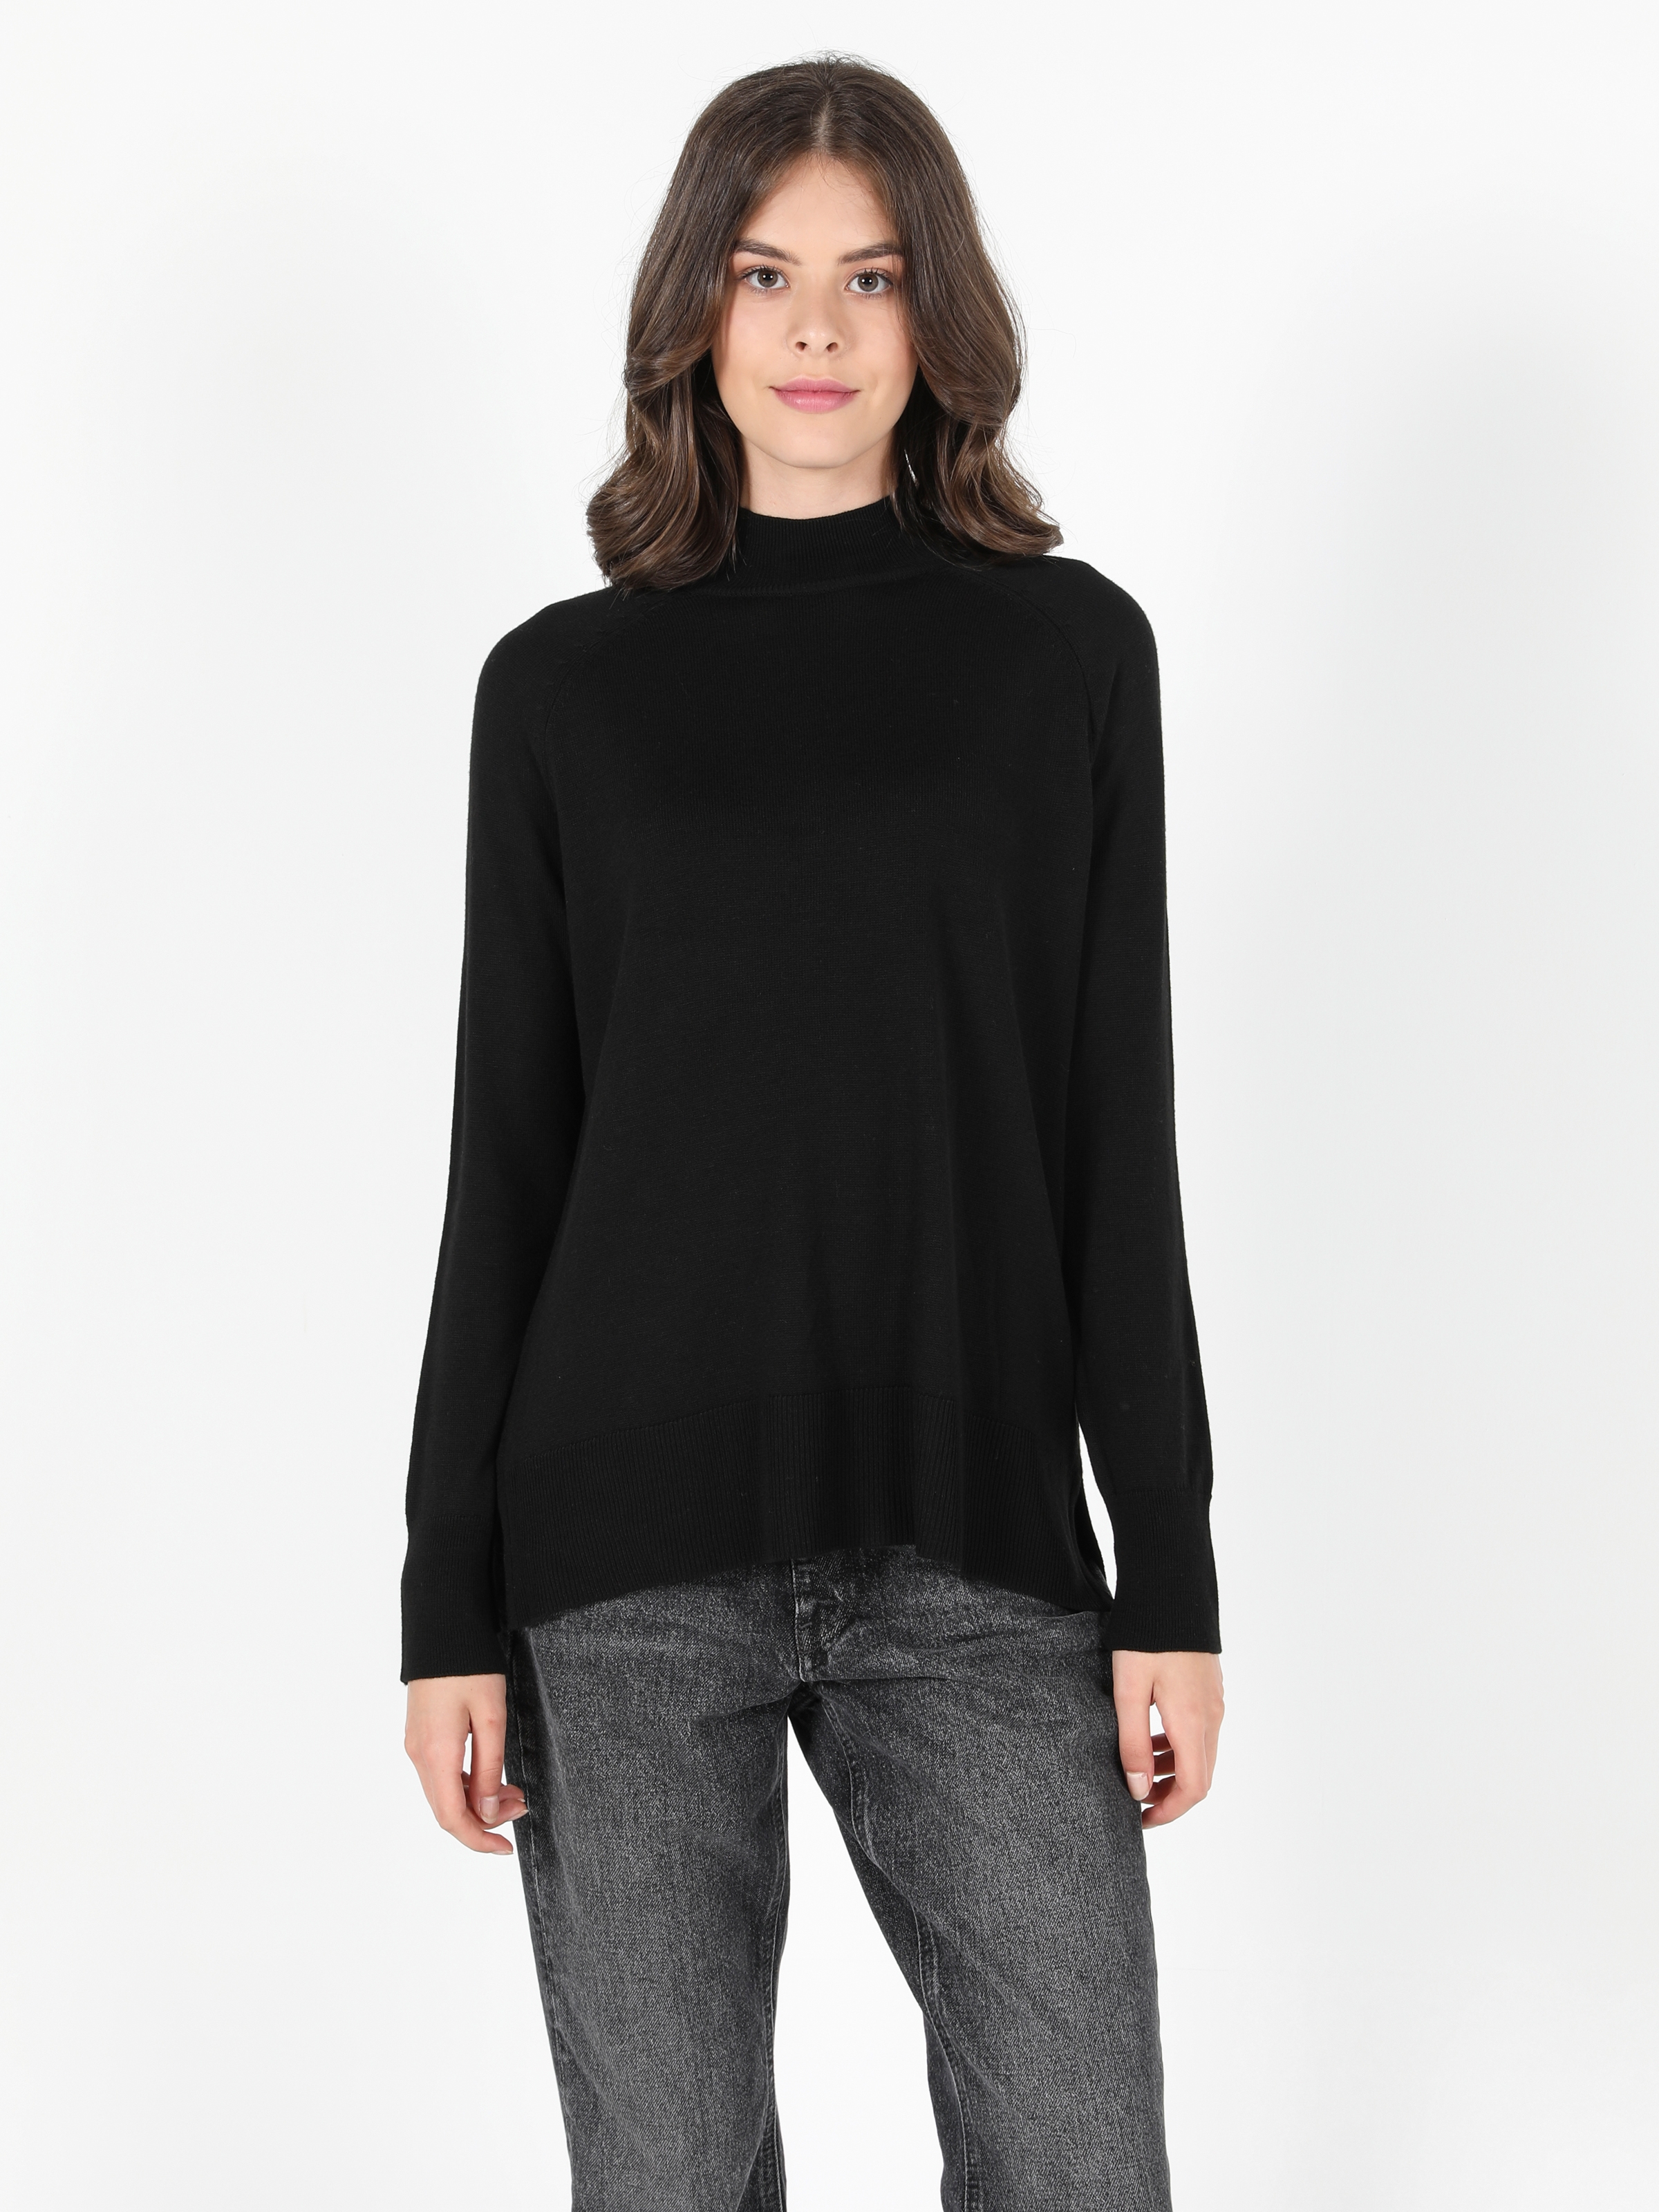 Colins Black Woman Sweaters. 4